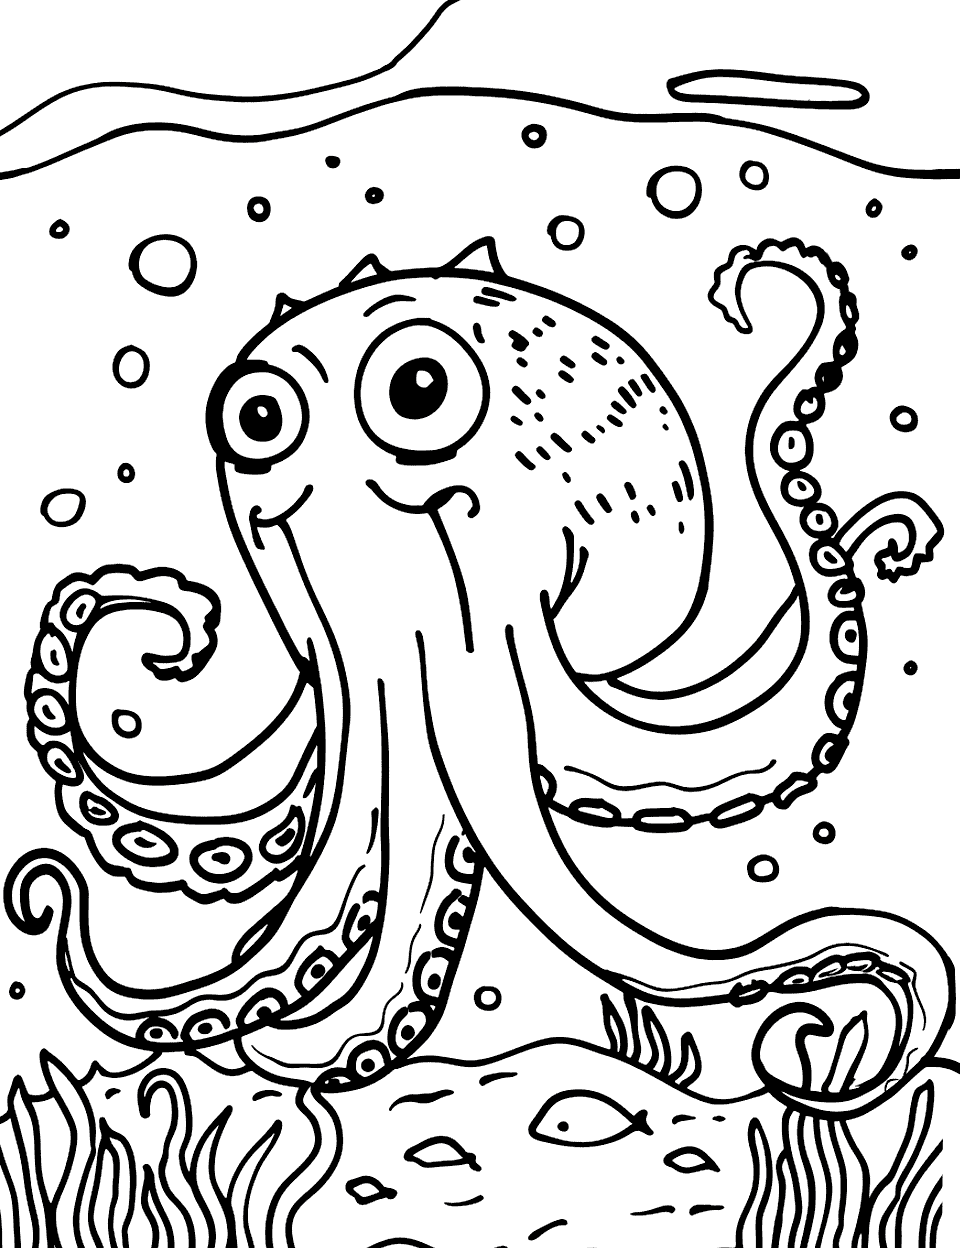 Octopus with Curled Tentacles Sea Creature Coloring Page - An octopus with curled tentacles gracefully exploring the seabed.